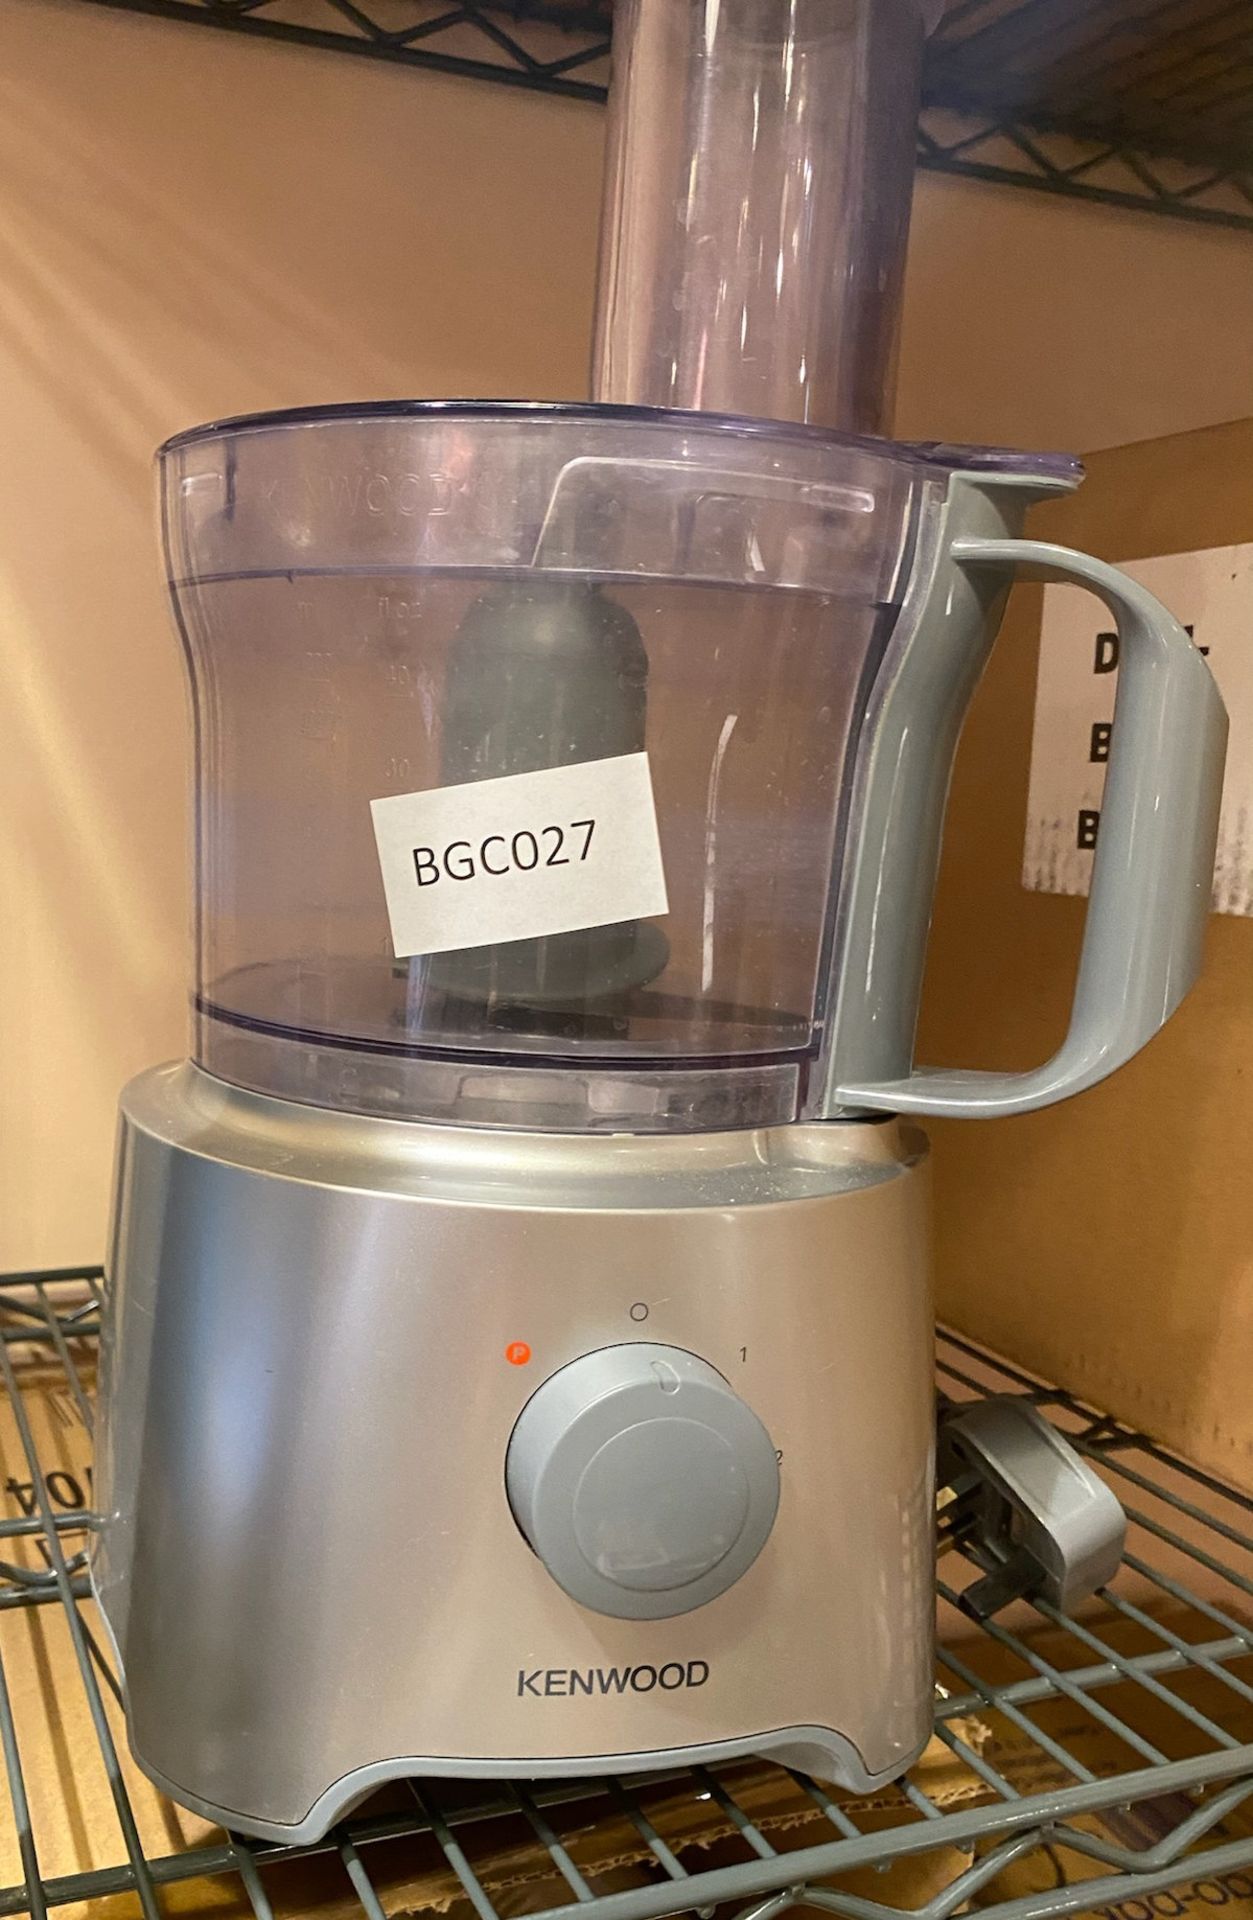 1 x Freestanding Kenwood Mixer - Ref: BGC027 - CL807 - Covent Garden, LondonFrom a recently closed